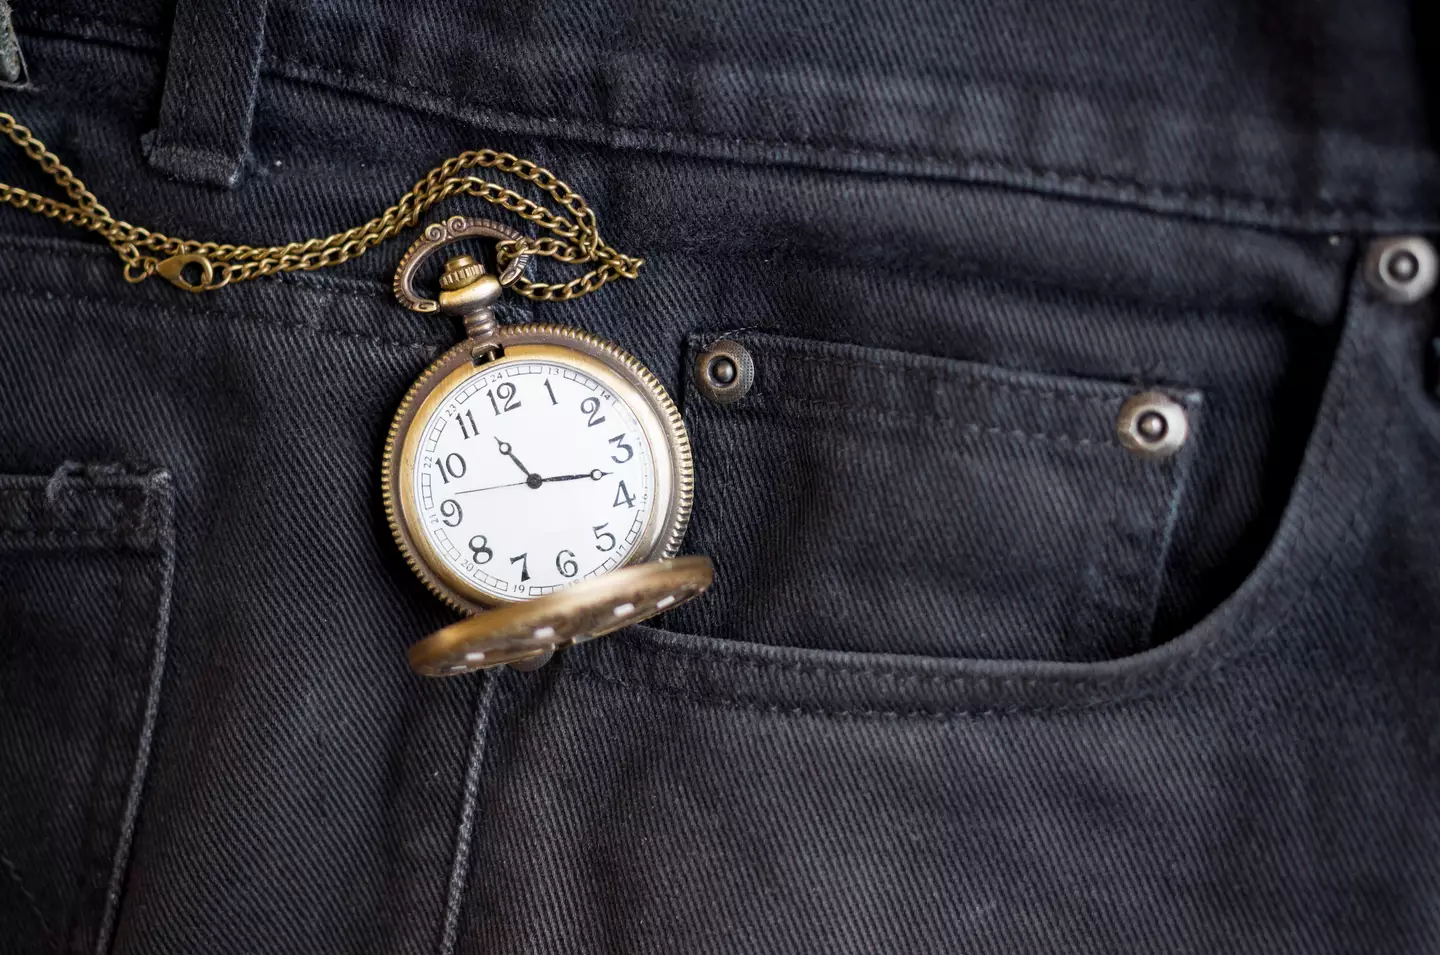 It turns out that the tiny pocket is never found on suit trousers because a pocket watch would be part of the inside of a jacket for formal wear. (Getty Stock Image)